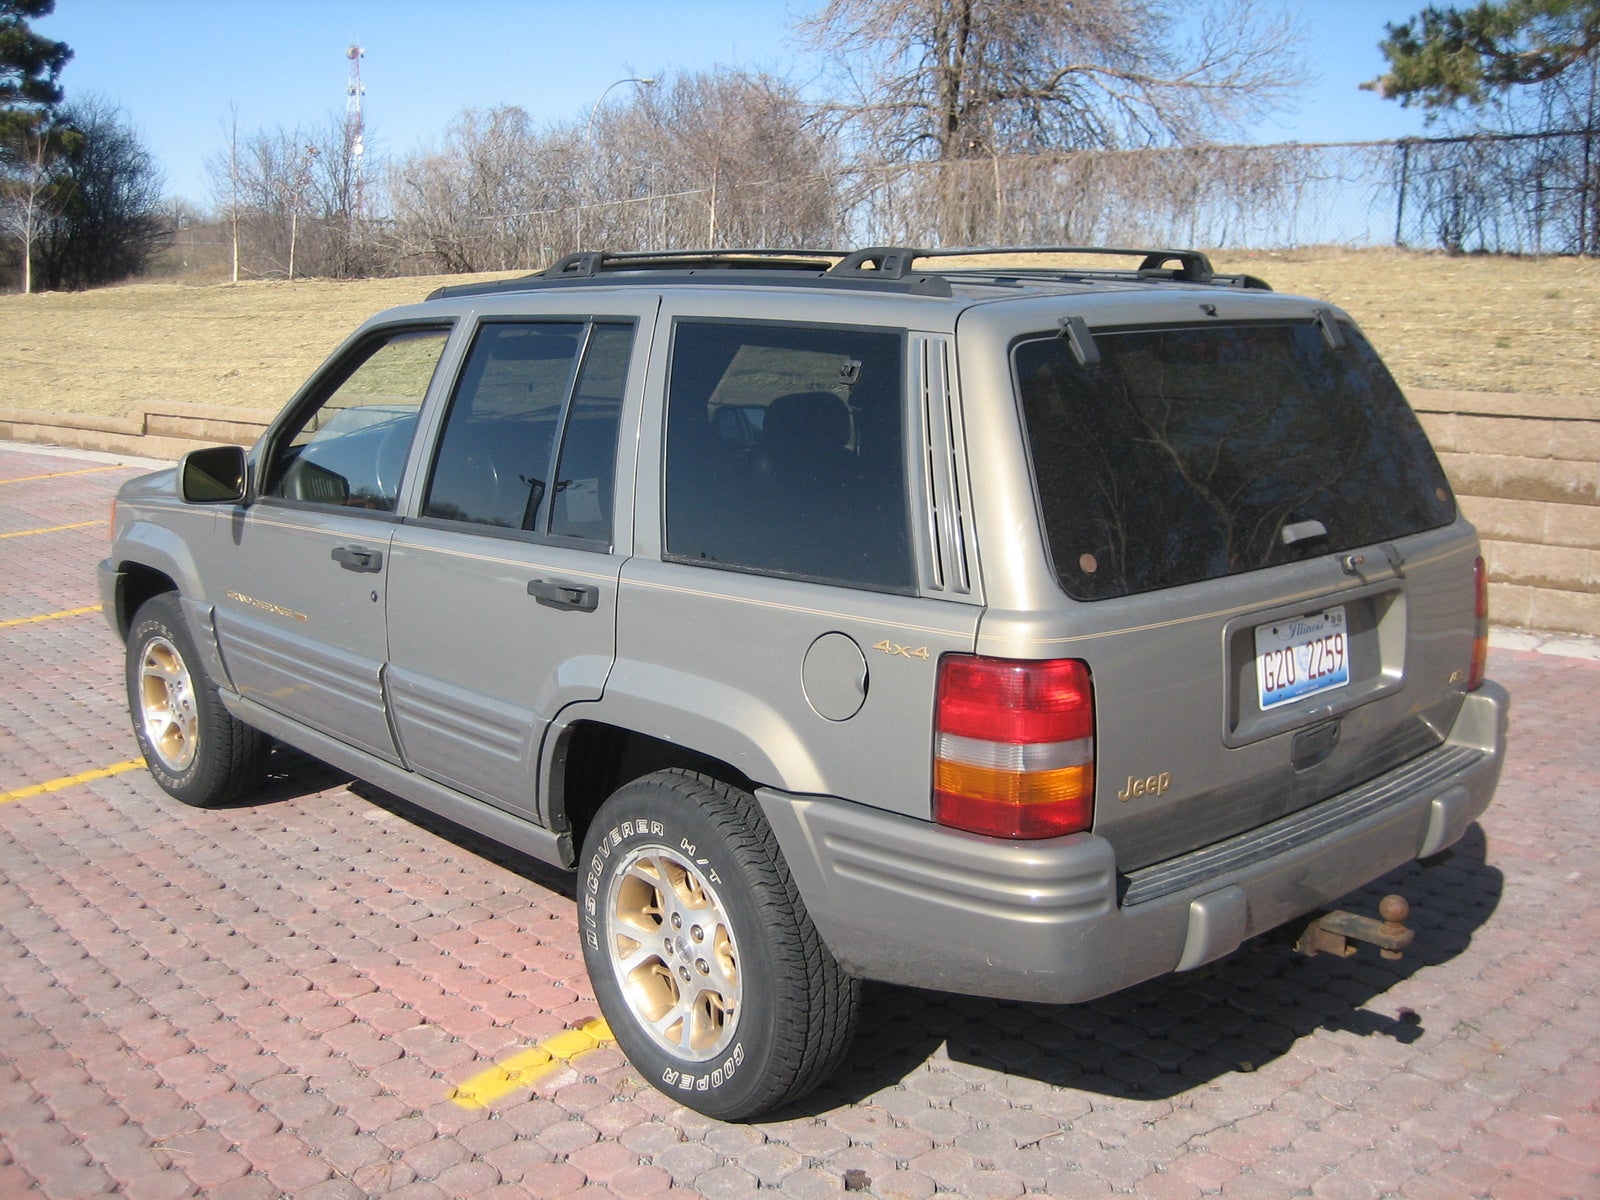 1996 Jeep grand cherokee limited edition reviews #5